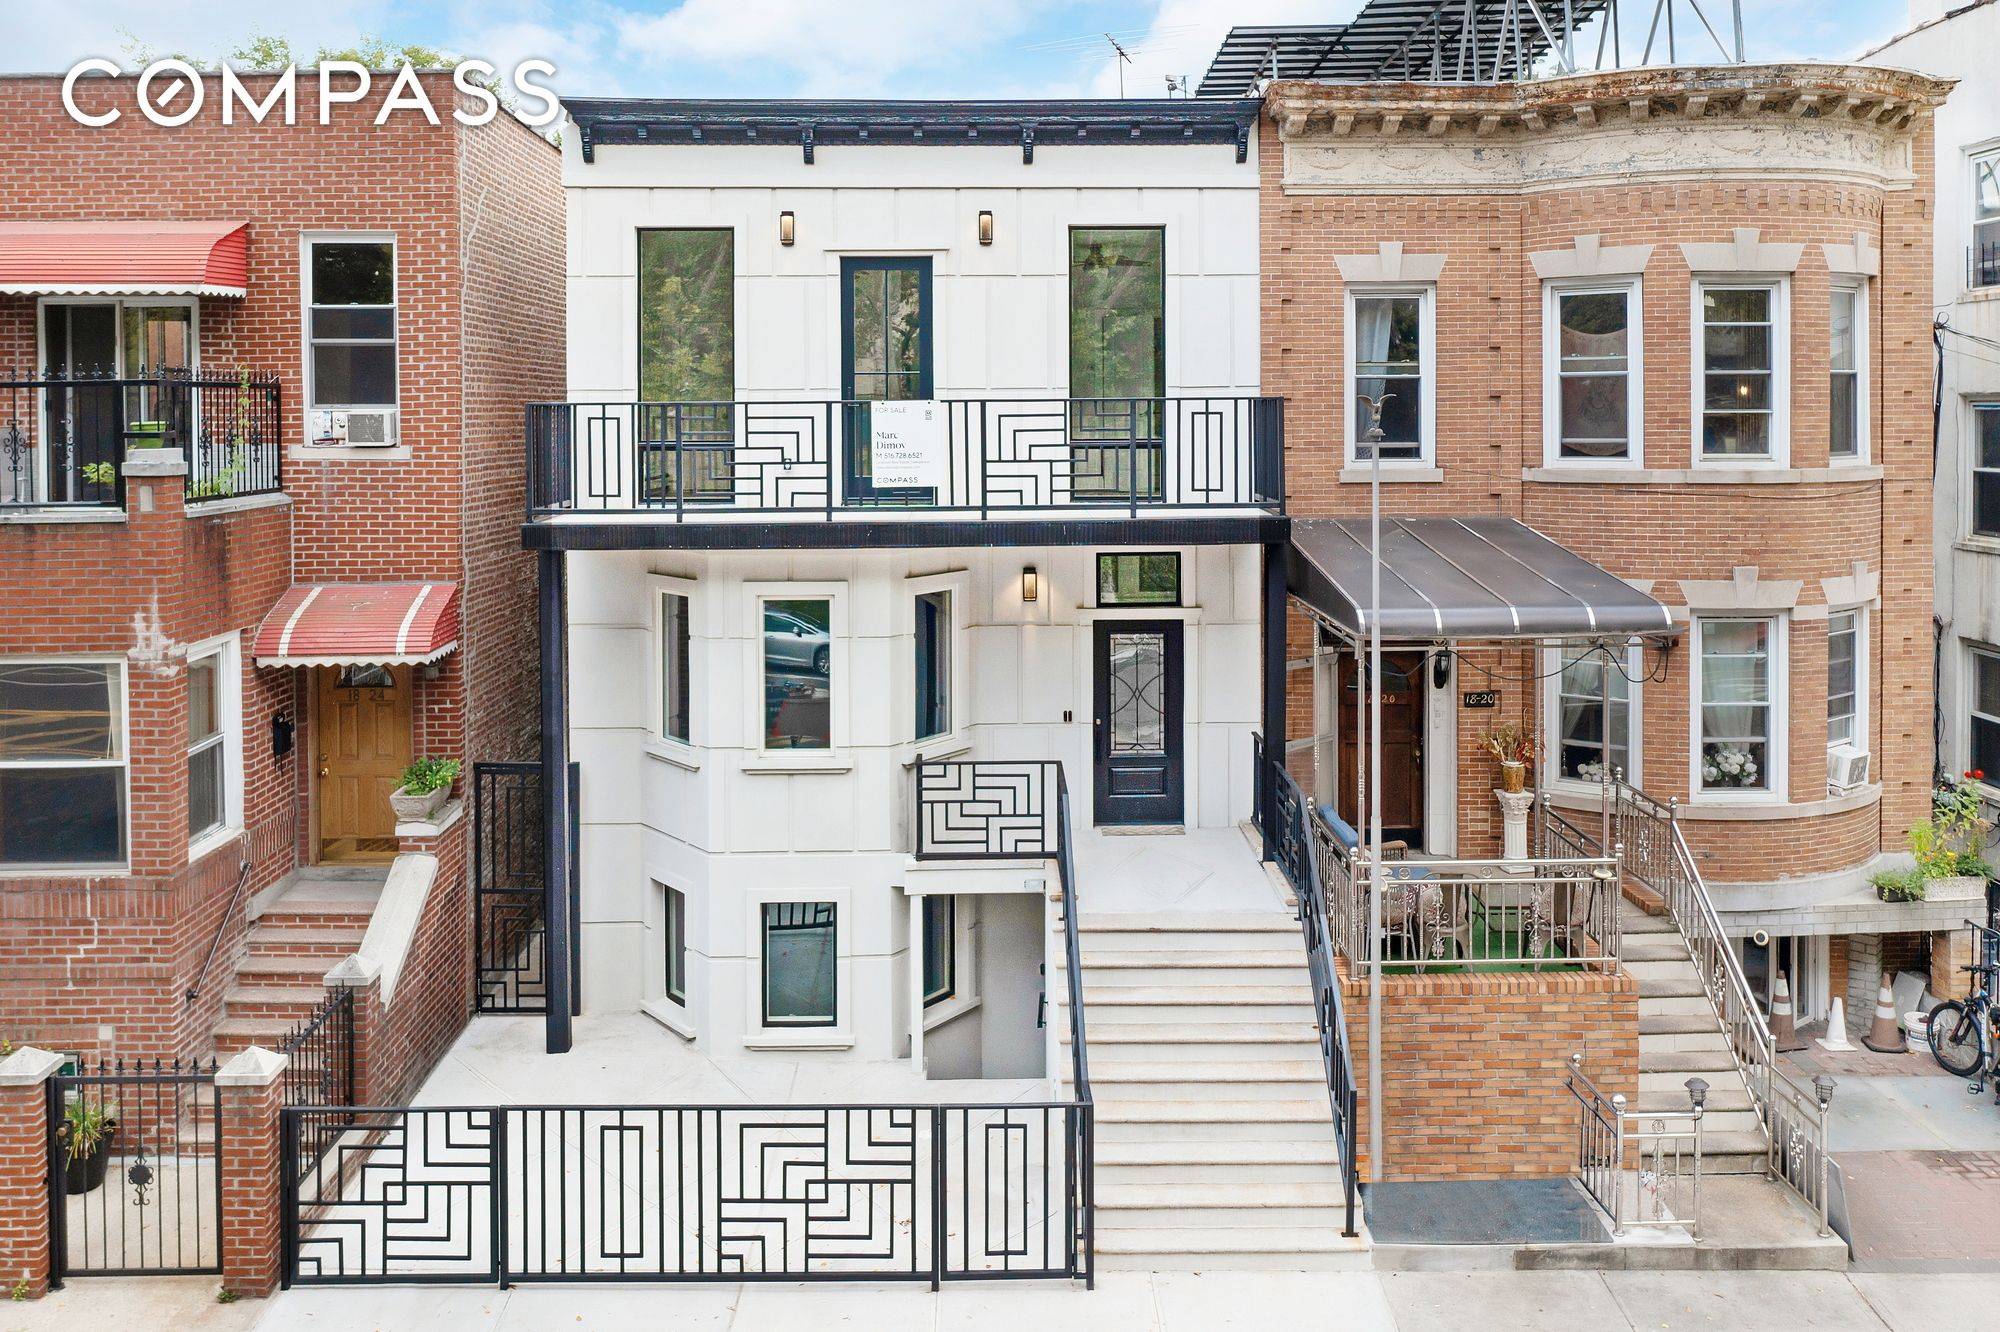 Legal Two Family Townhouse Across from Astoria Park Fully Renovated Duplex with Backyard Top Floor Apartment with Front Facing Terrace, Optimized Floor Plan, High Ceilings, Updated Bathrooms and Kitchens with ...